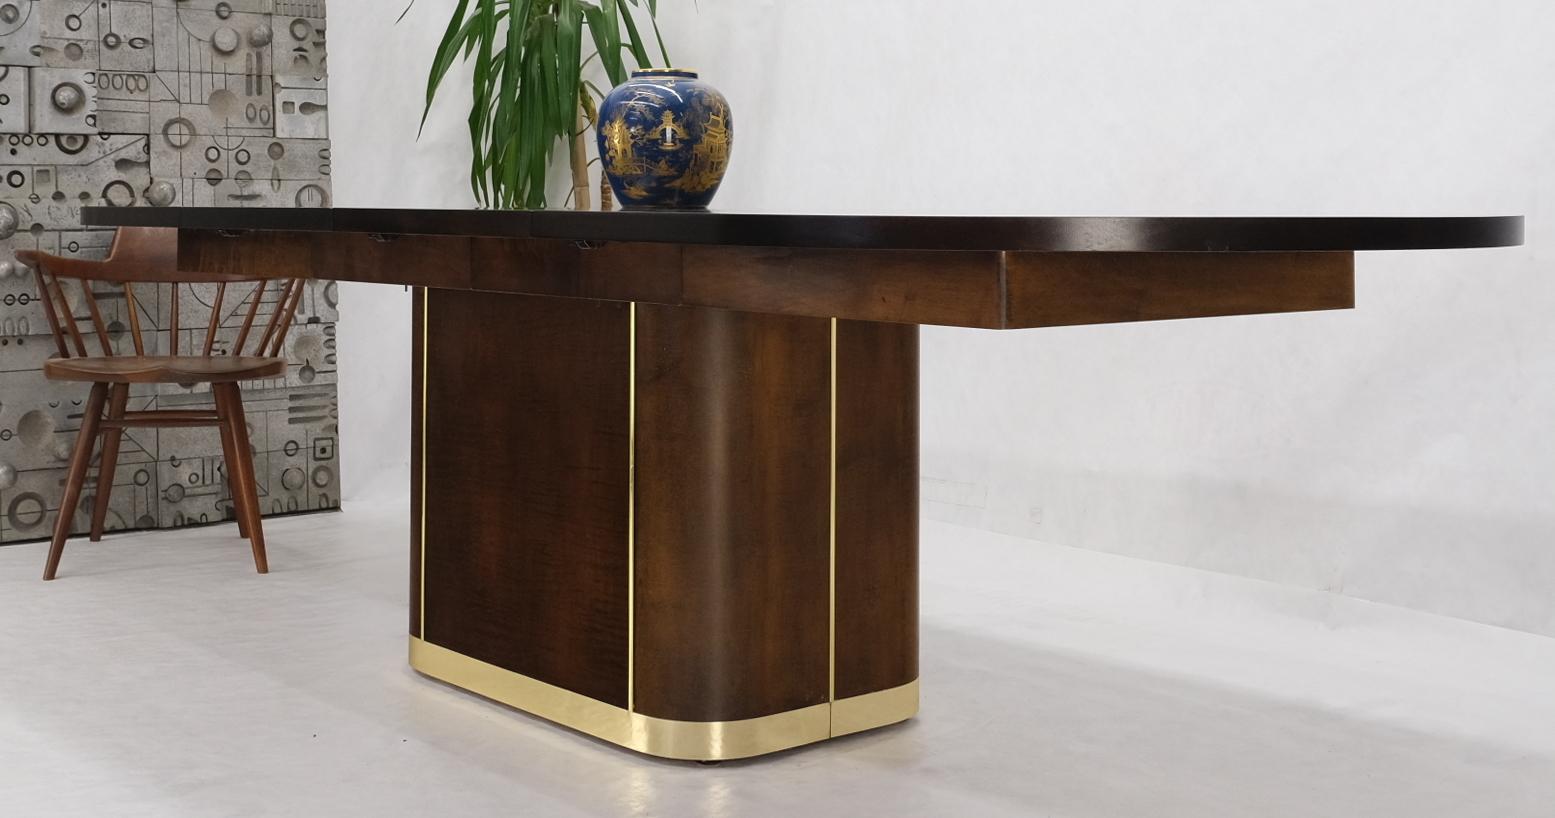 Racetrack oval single pedestal base brass espresso dining conference table.
2x20